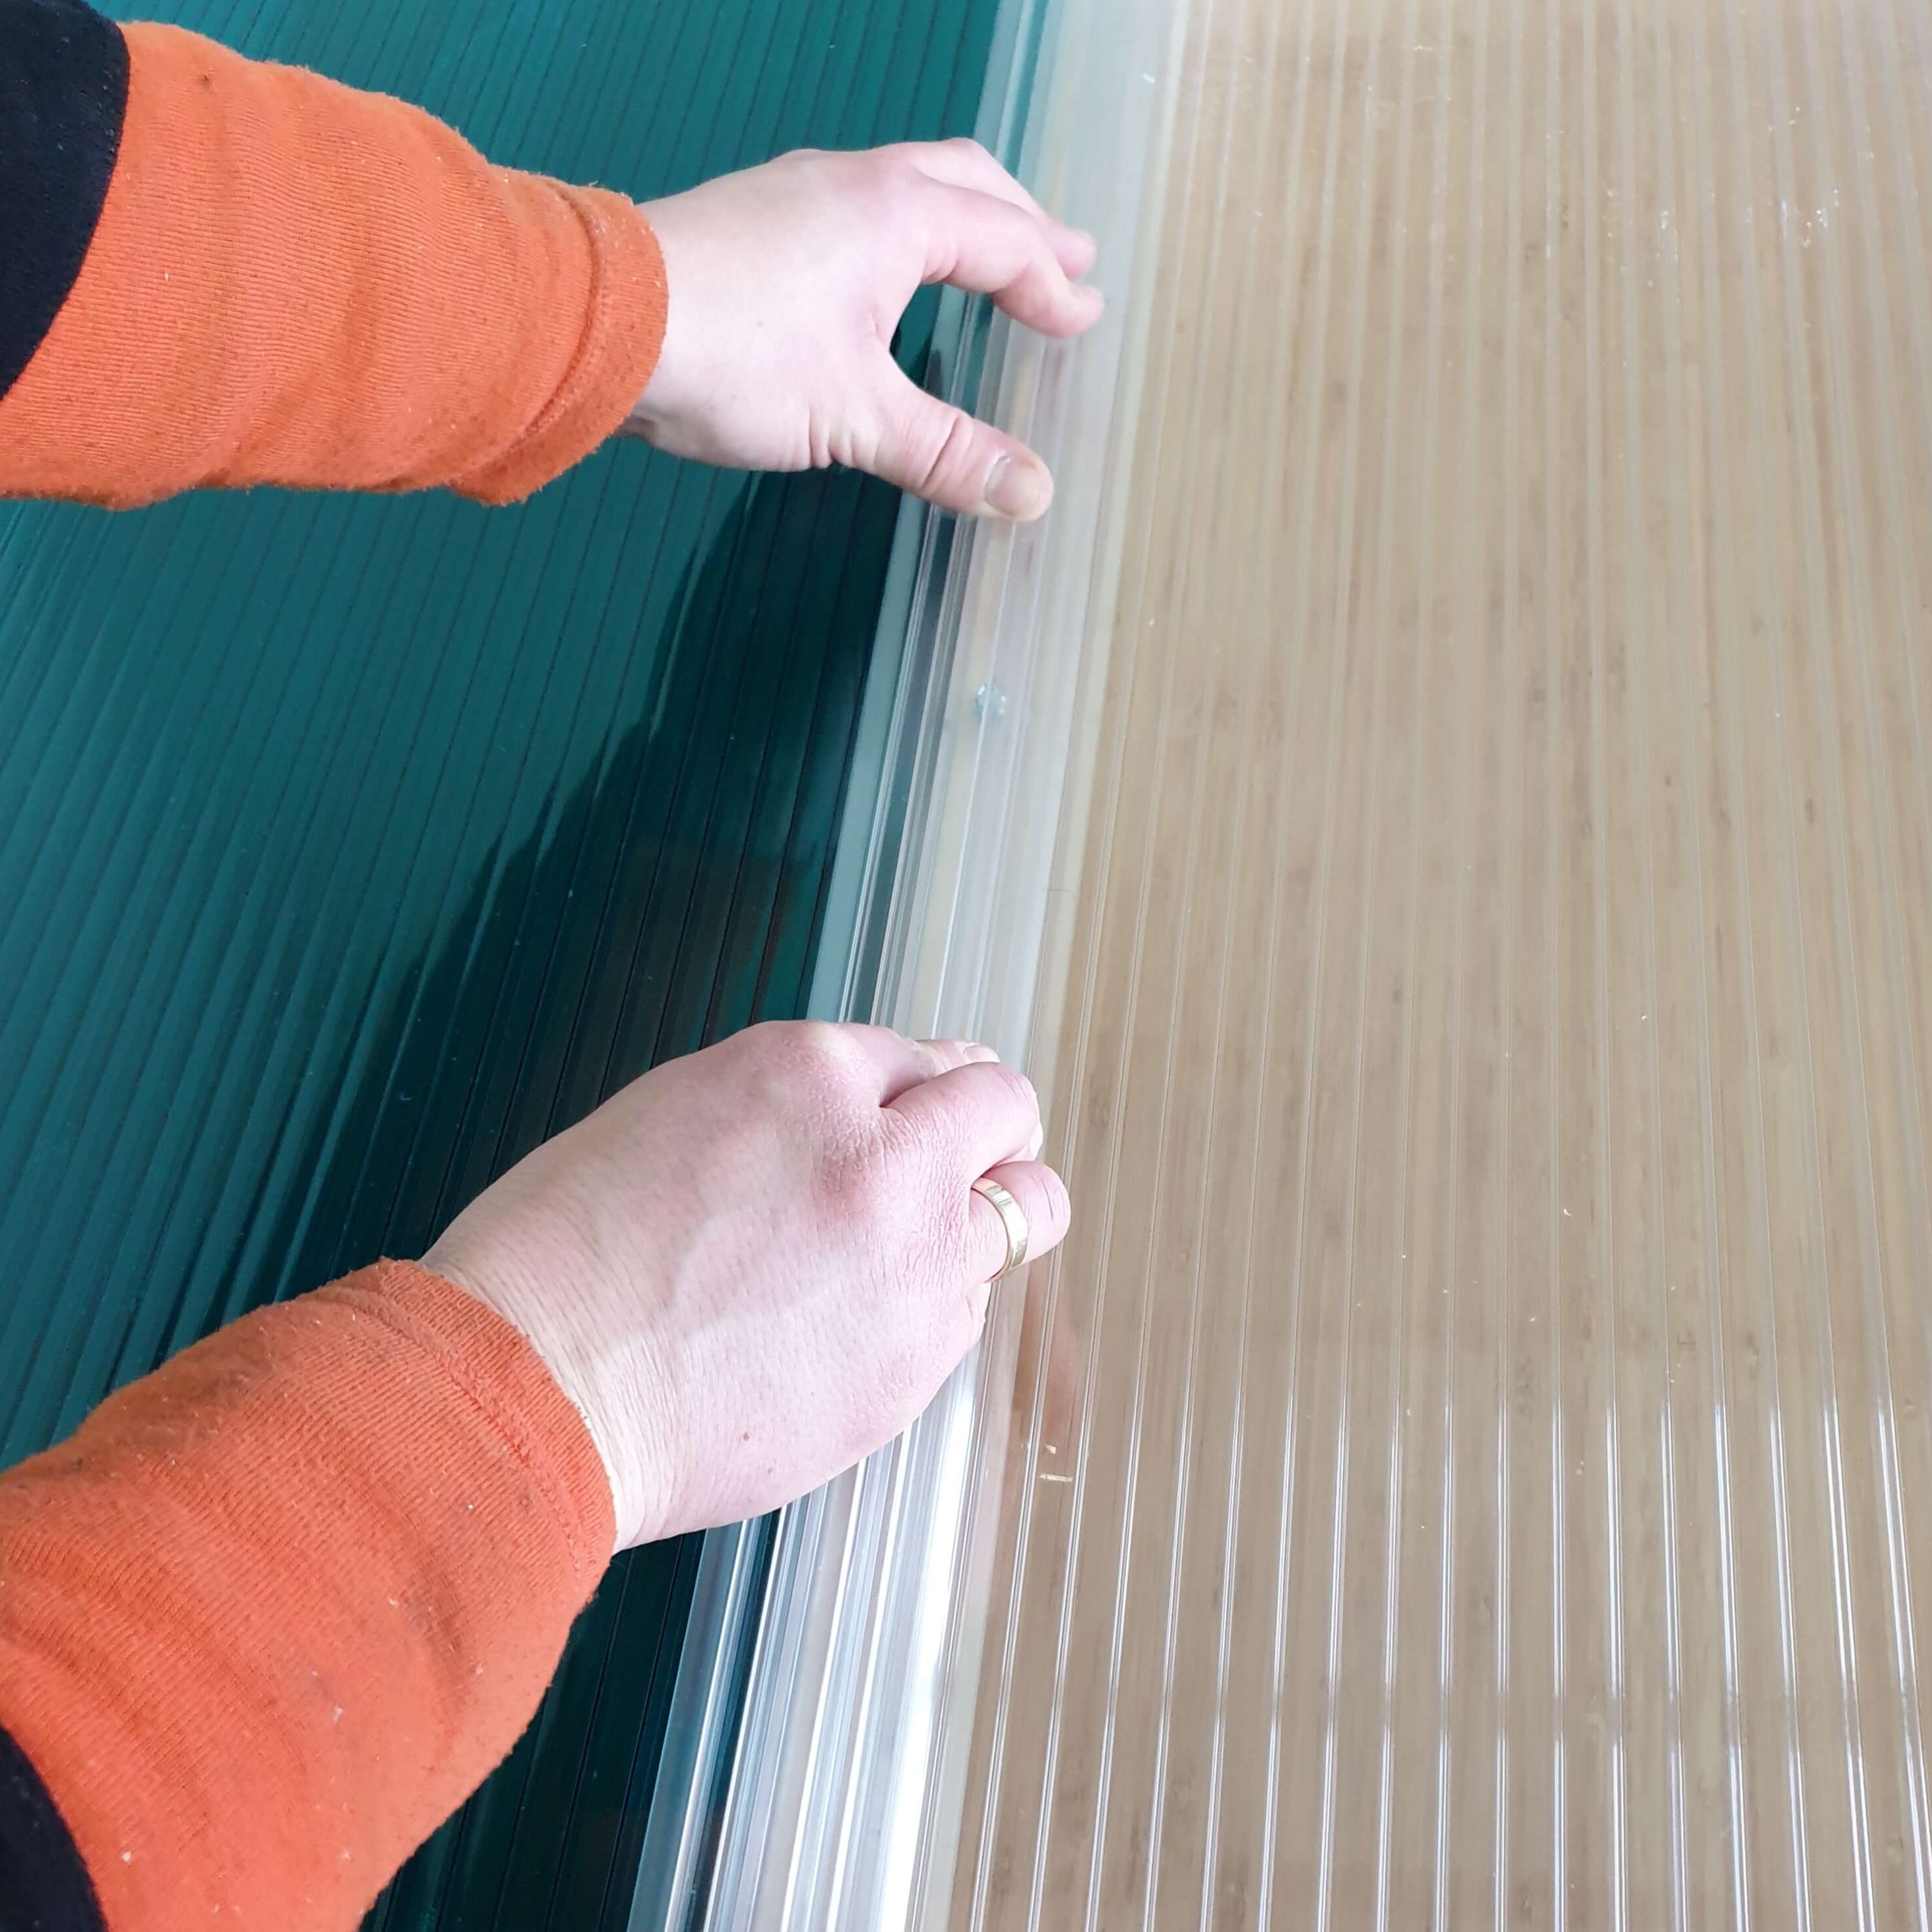 Polycarbonate Snap-Down Glazing Bar for Use With 4mm / 6mm / 8mm / 10mm Polycarbonate Roofing Sheet From £2.70 - Decoridea.co.uk